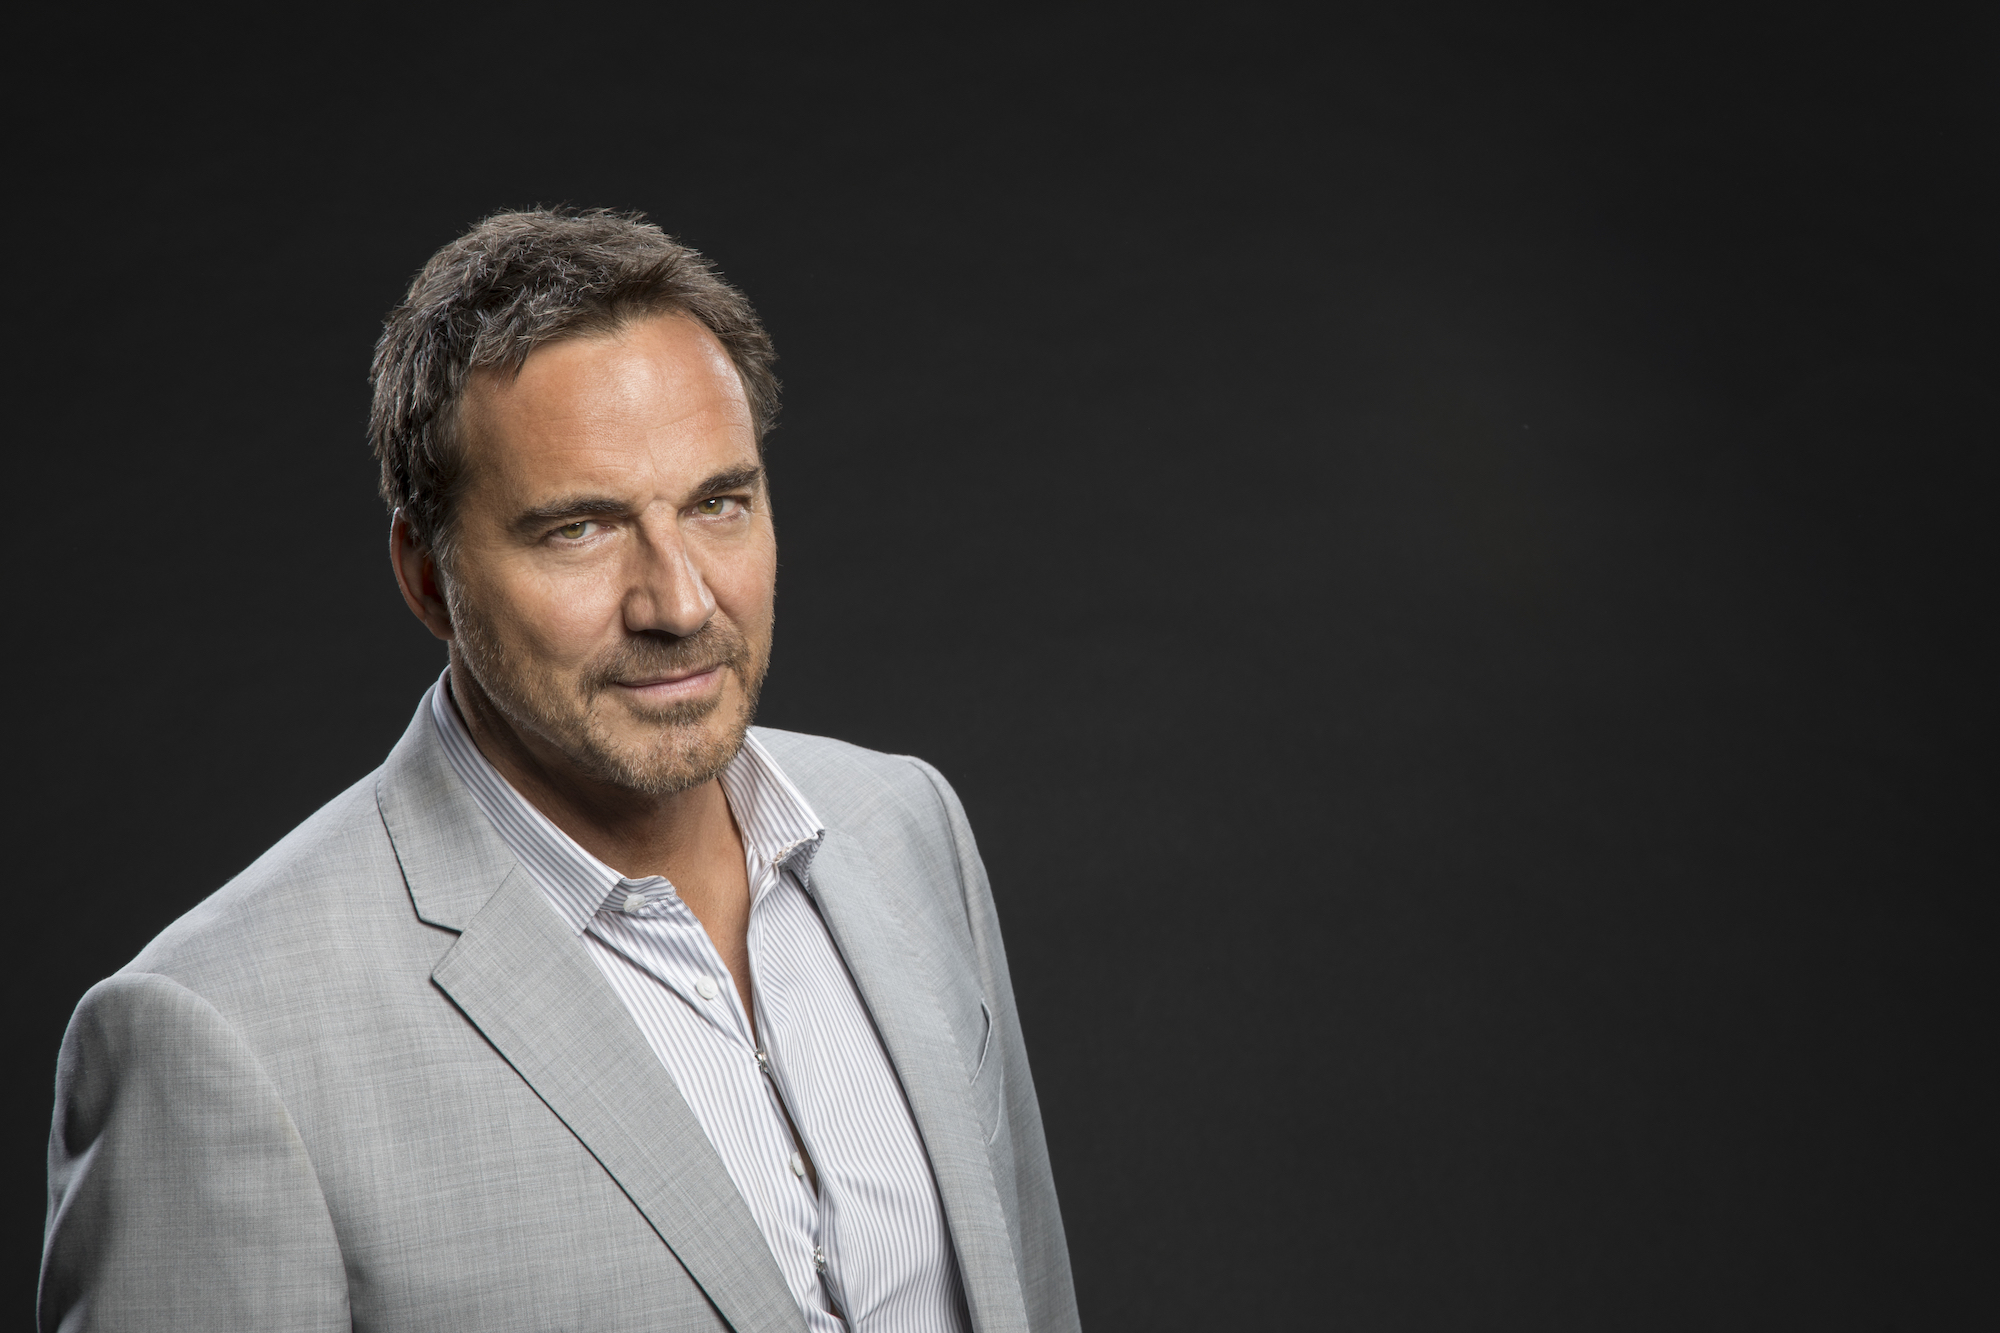 Thorsten Kaye smiling in front of a black background